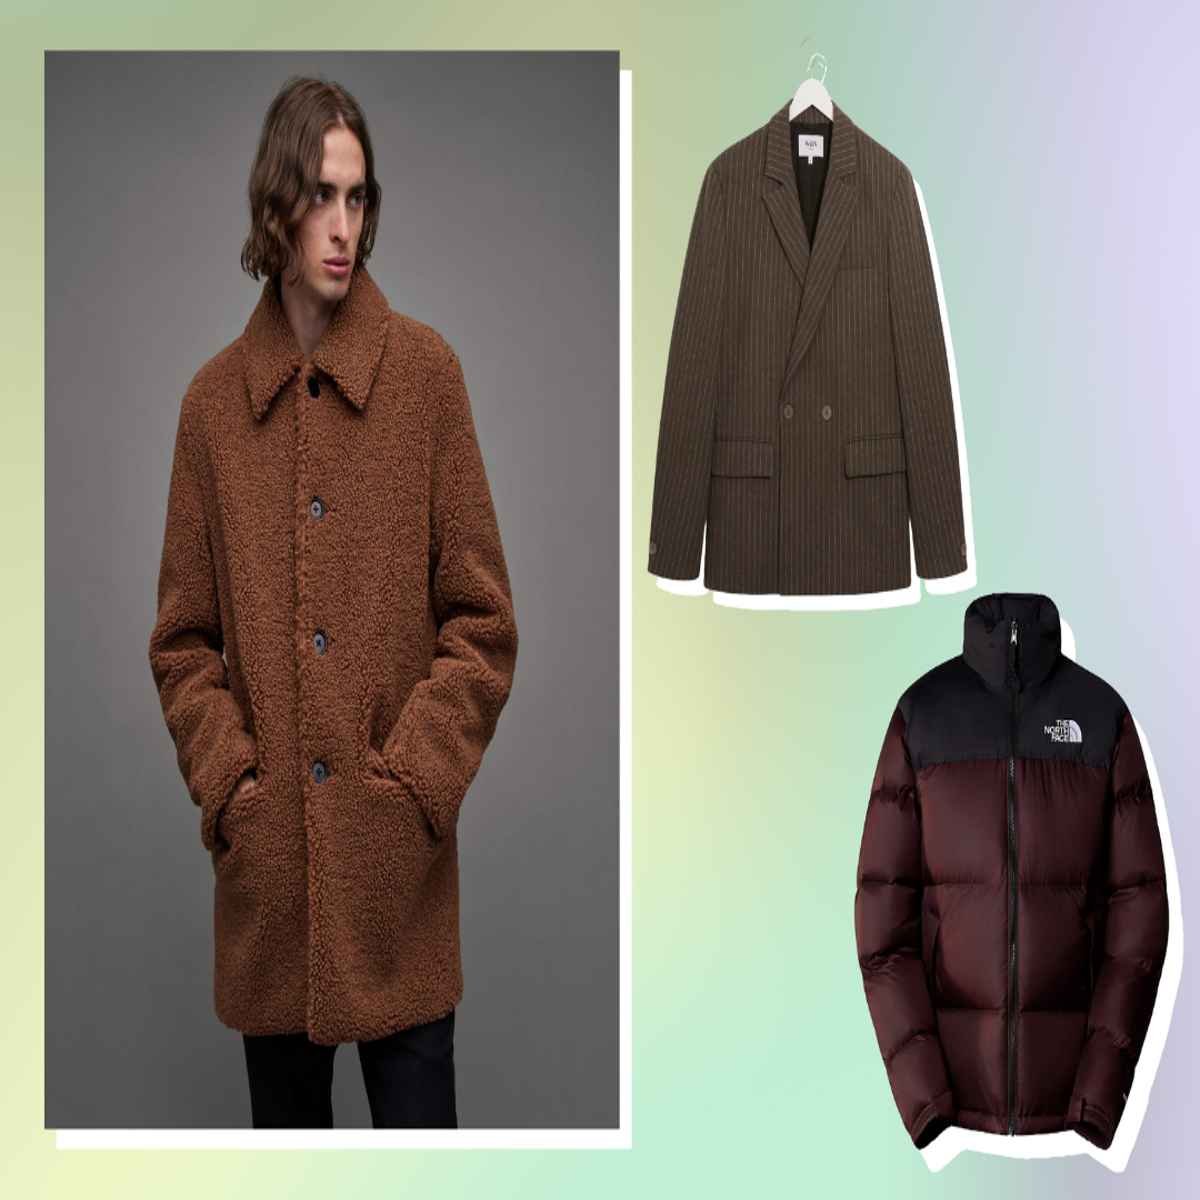 Find your perfect Wool coats here